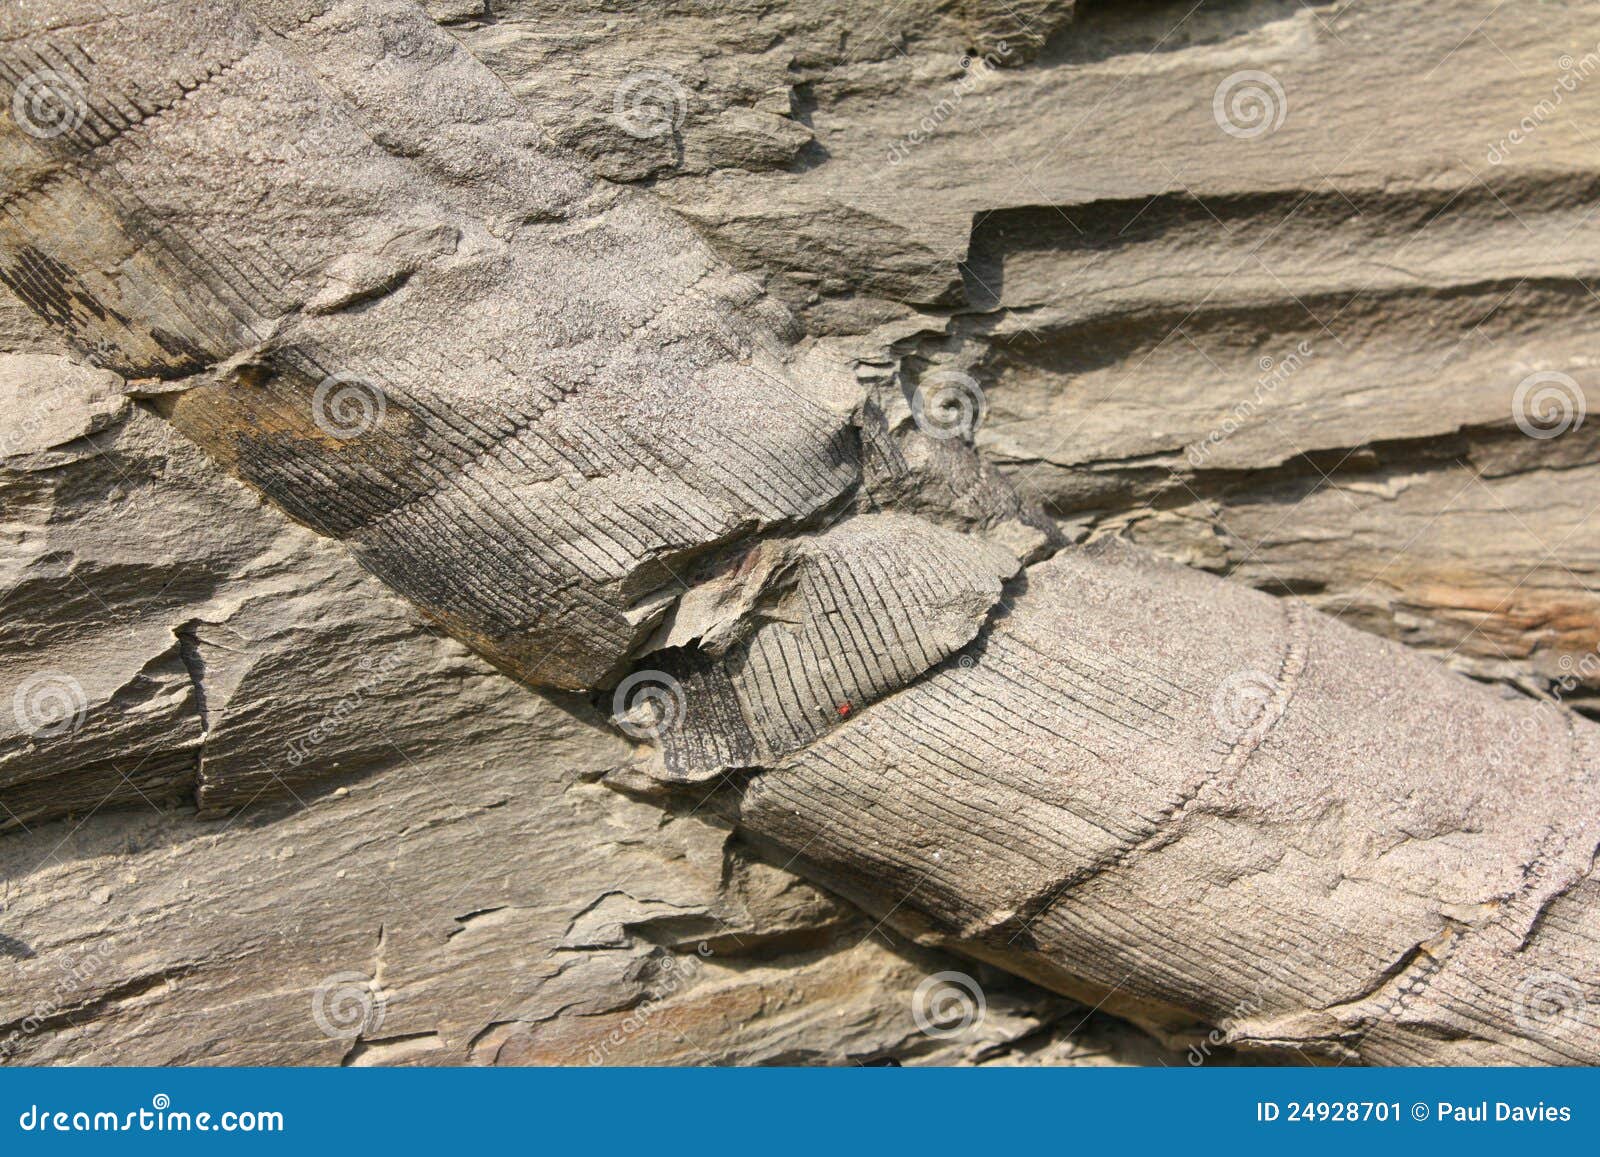 Fossil Plant Stem stock image. Image of geological, plant - 24928701